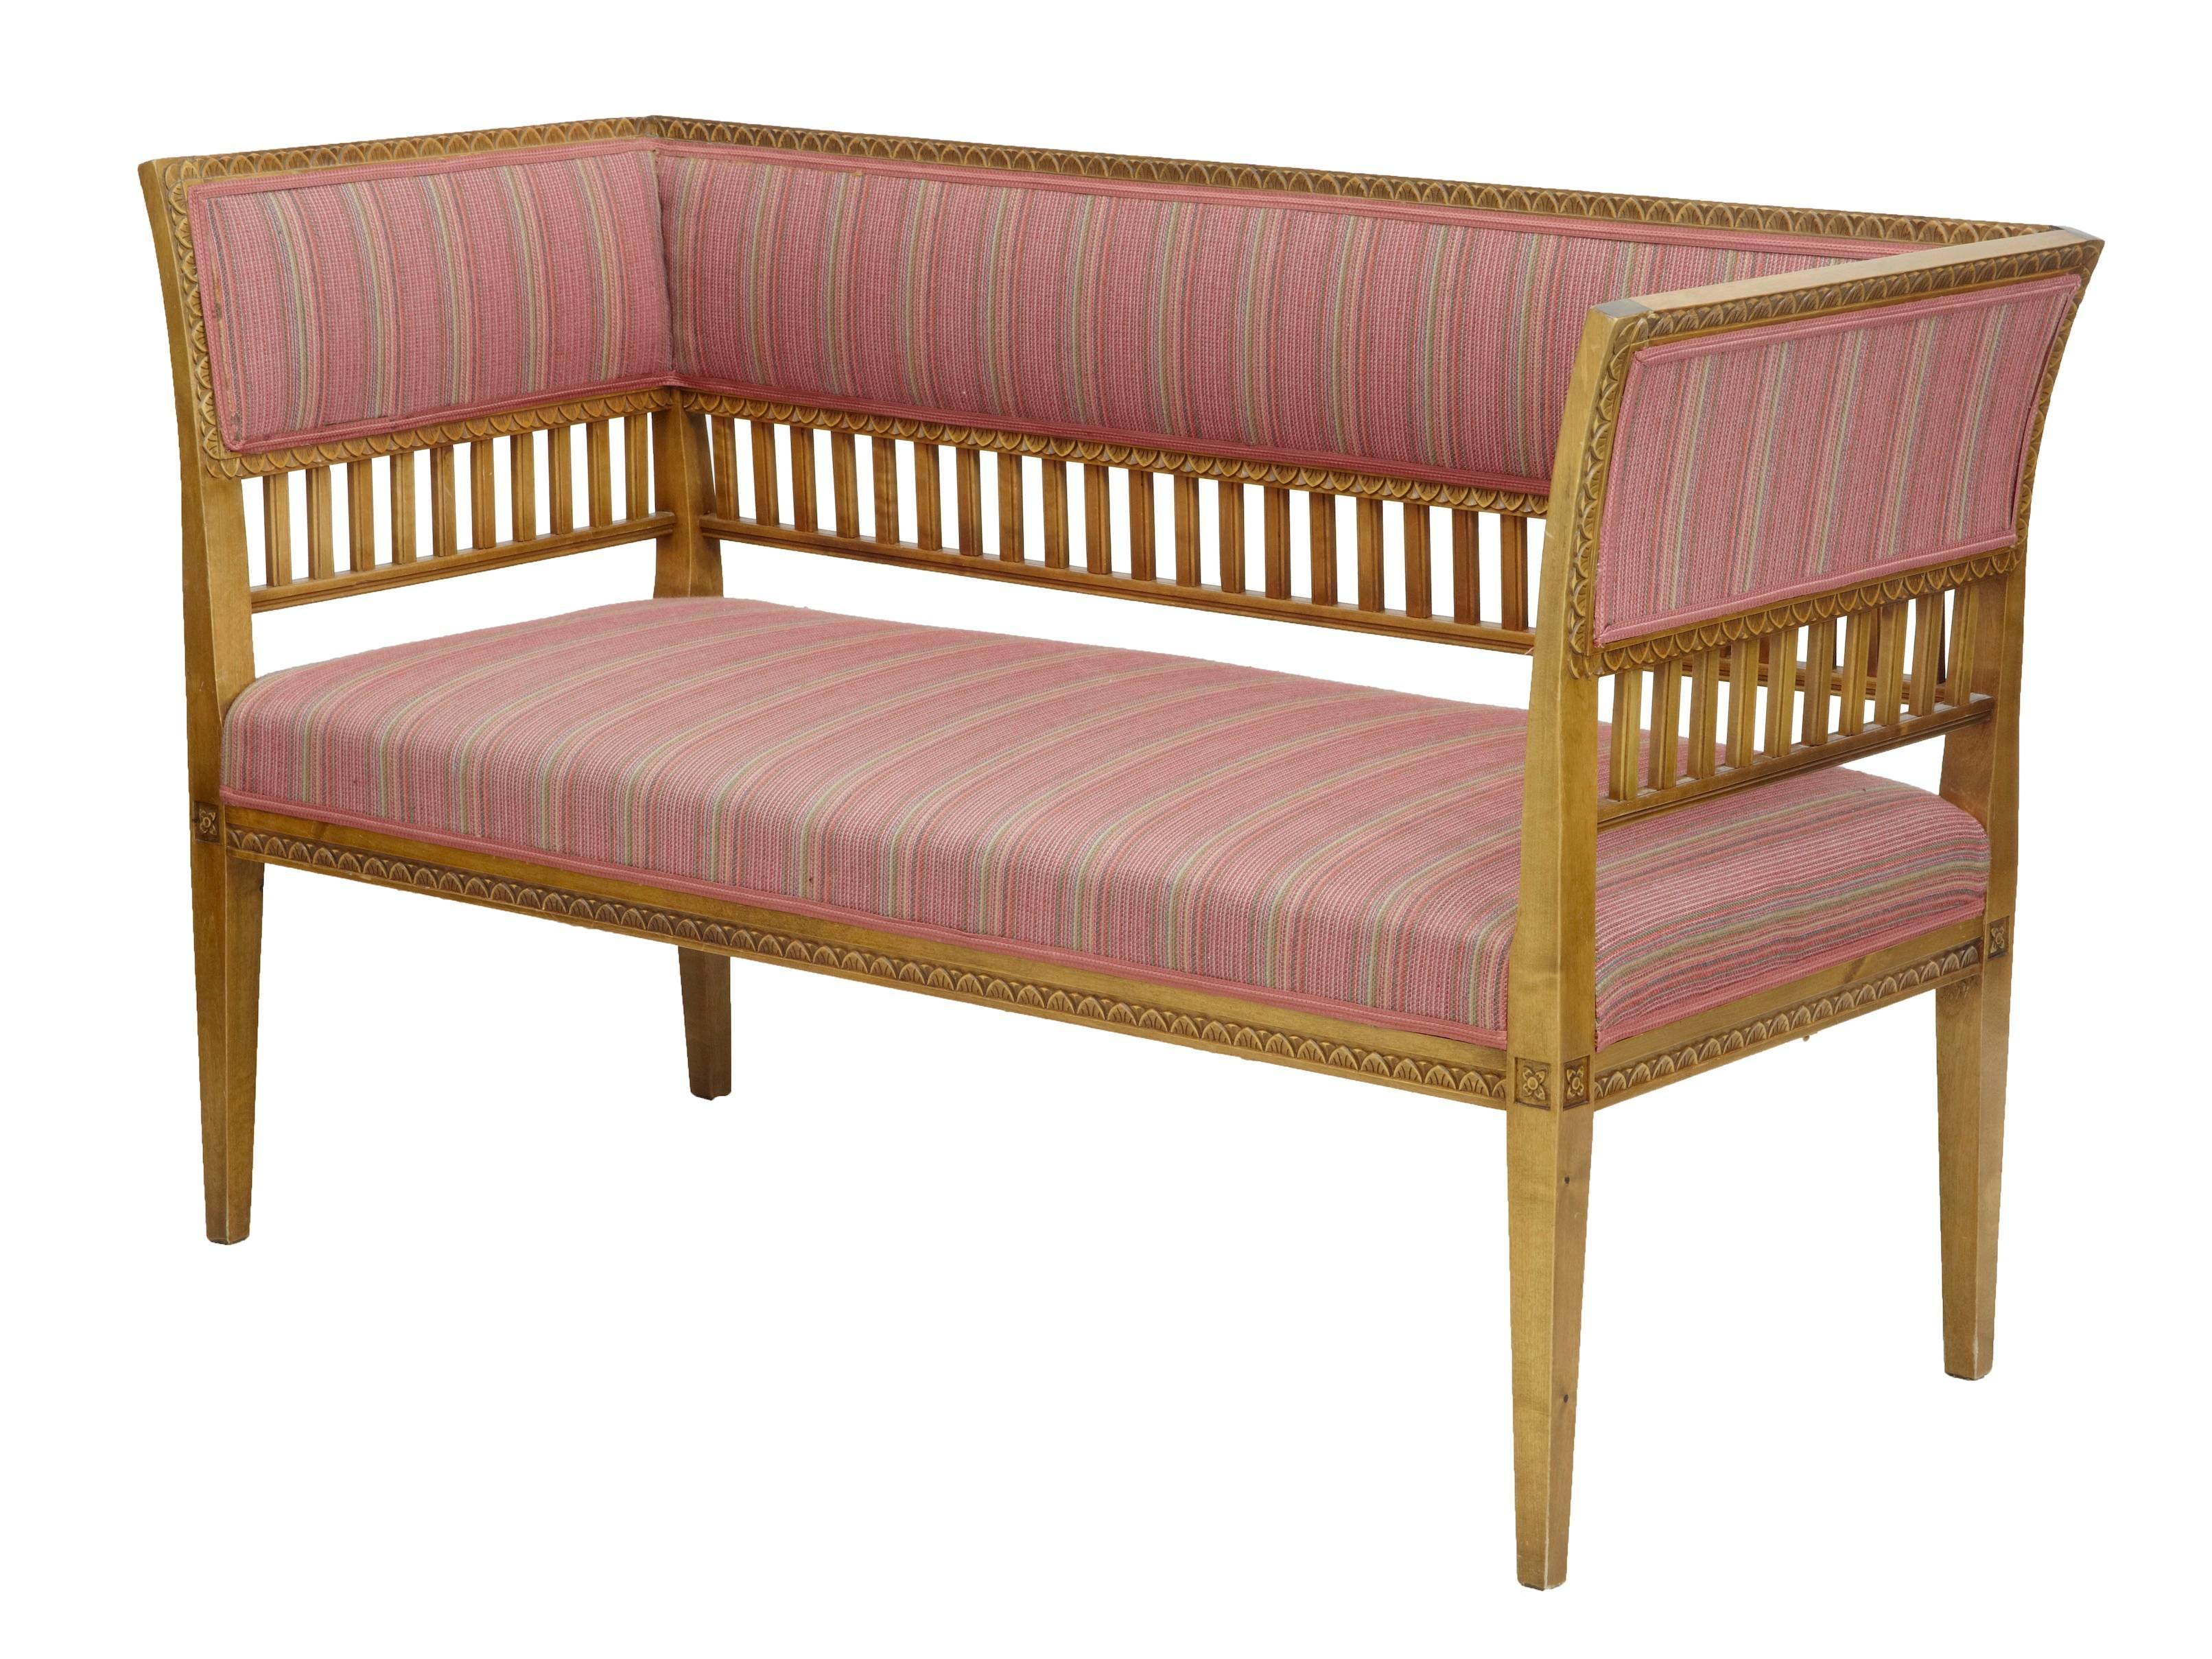 Good quality pair of birch sofas, circa 1910.
Gustavian inspired with light carving around the backrest. Exposed woodwork.
Standing on tapering legs.

Upholstery in good useable condition.
Measures: Height: 33